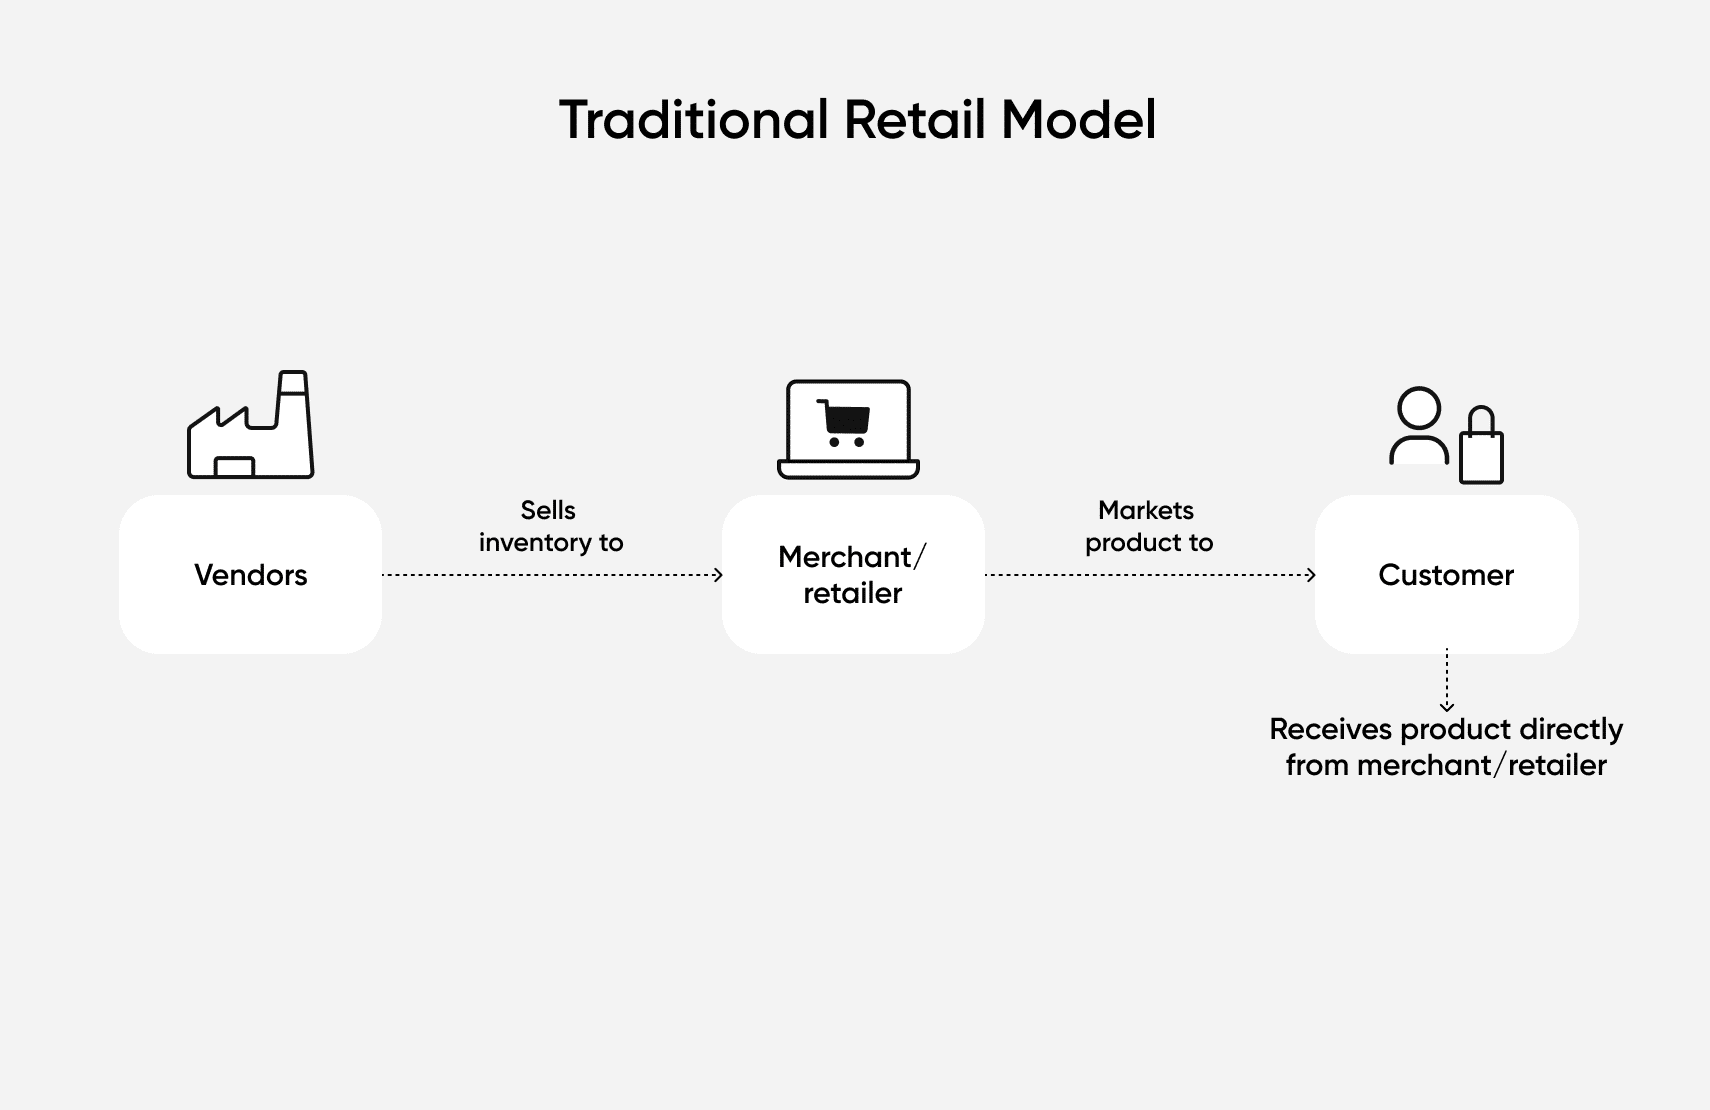 How getting the best products works in traditional retail